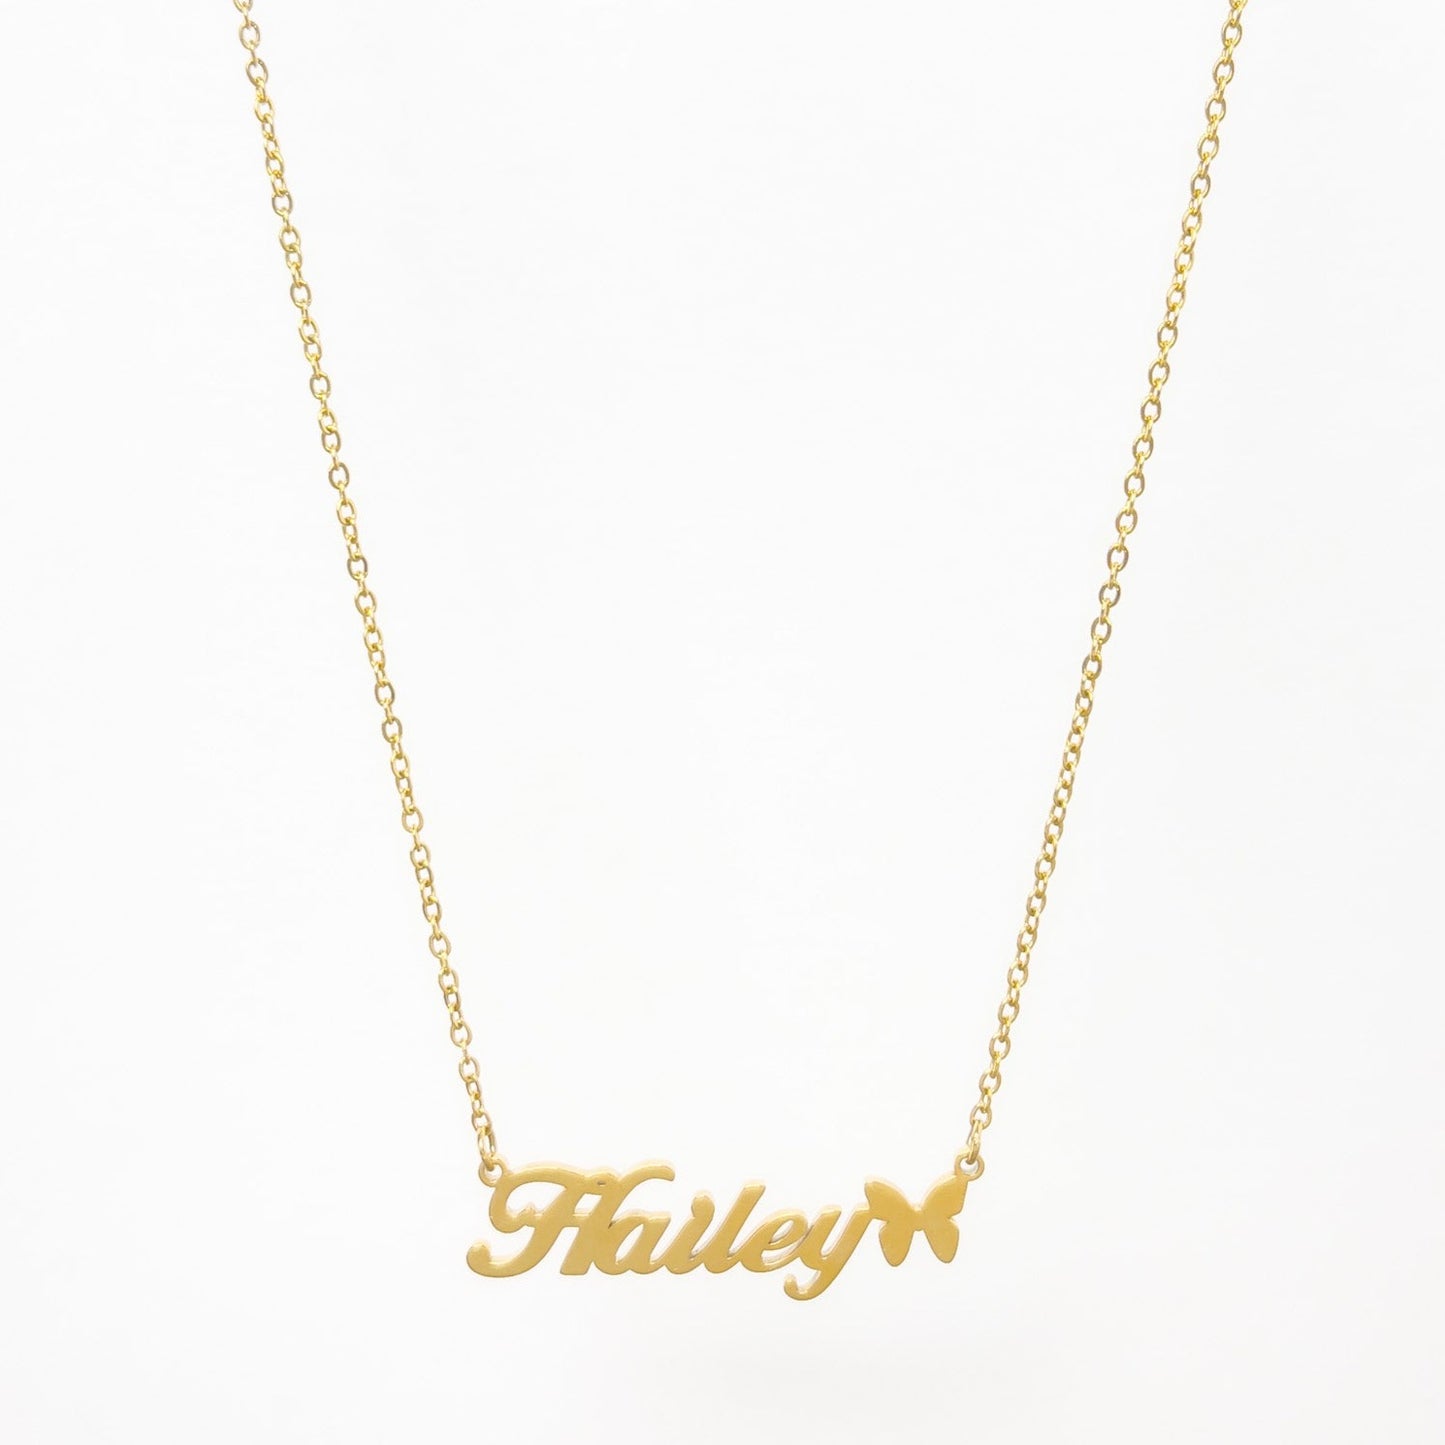 THE PERSONALISED BUTTERFLY NAME NECKLACE